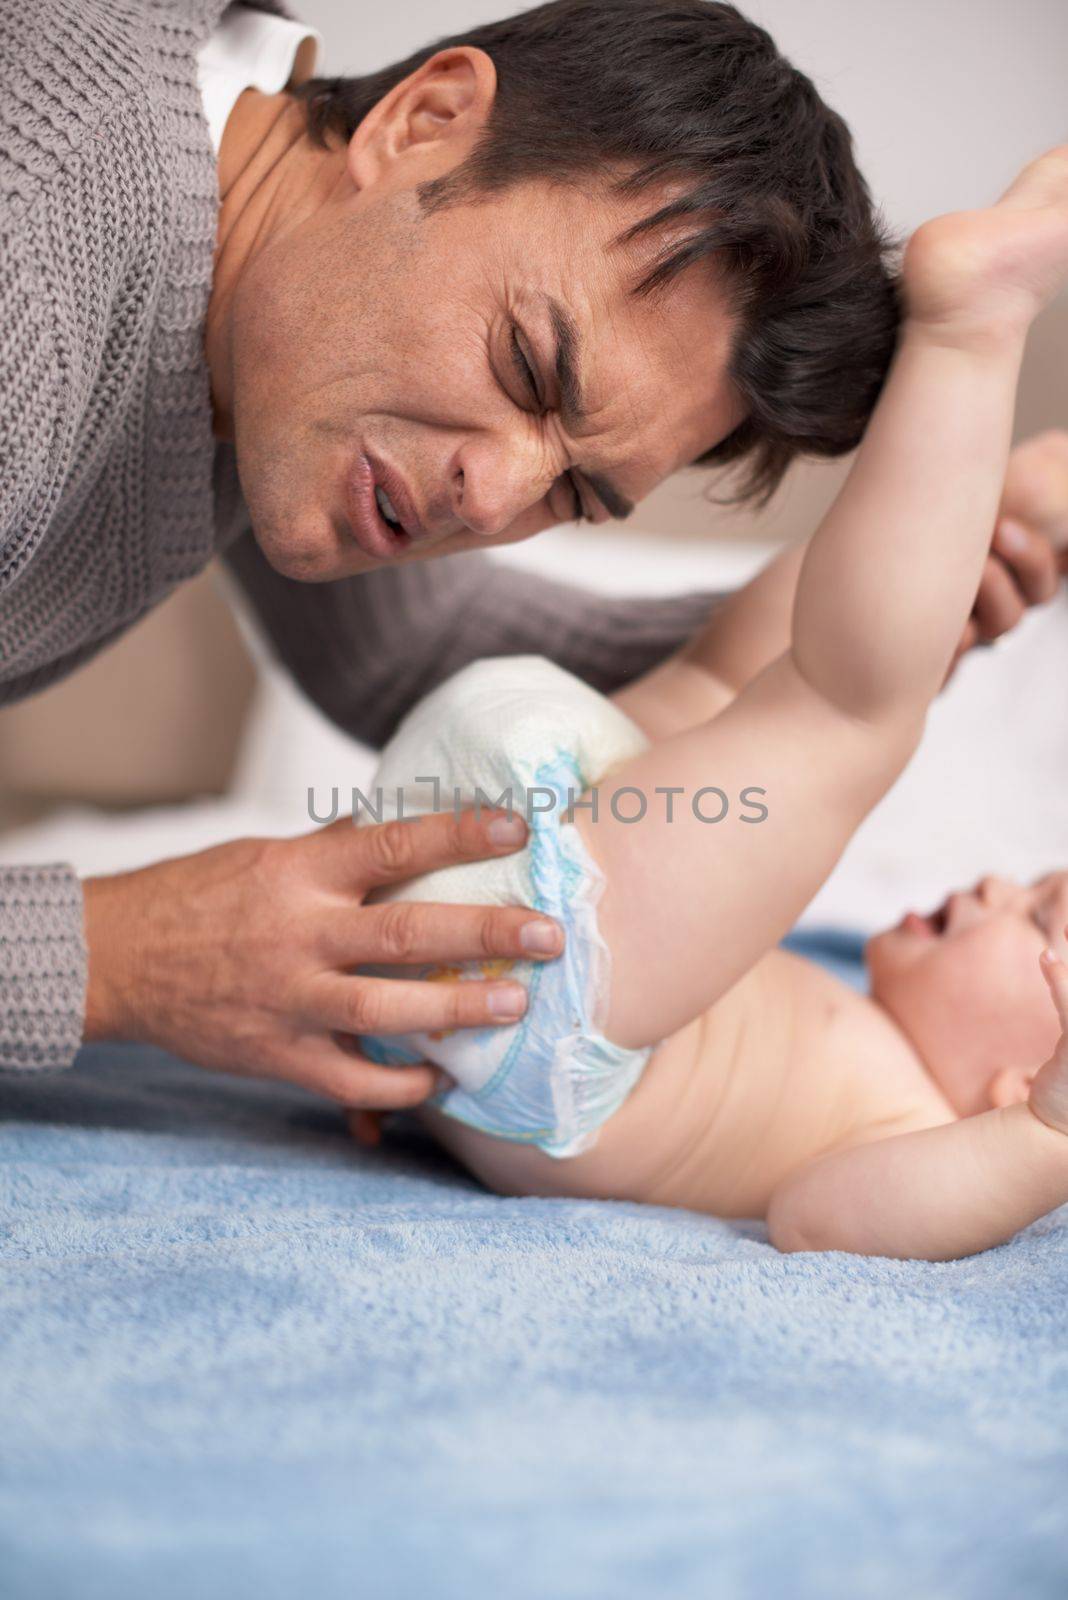 Changing diapers is an awful job. A young father making a face as he smells his babyamp039s diaper